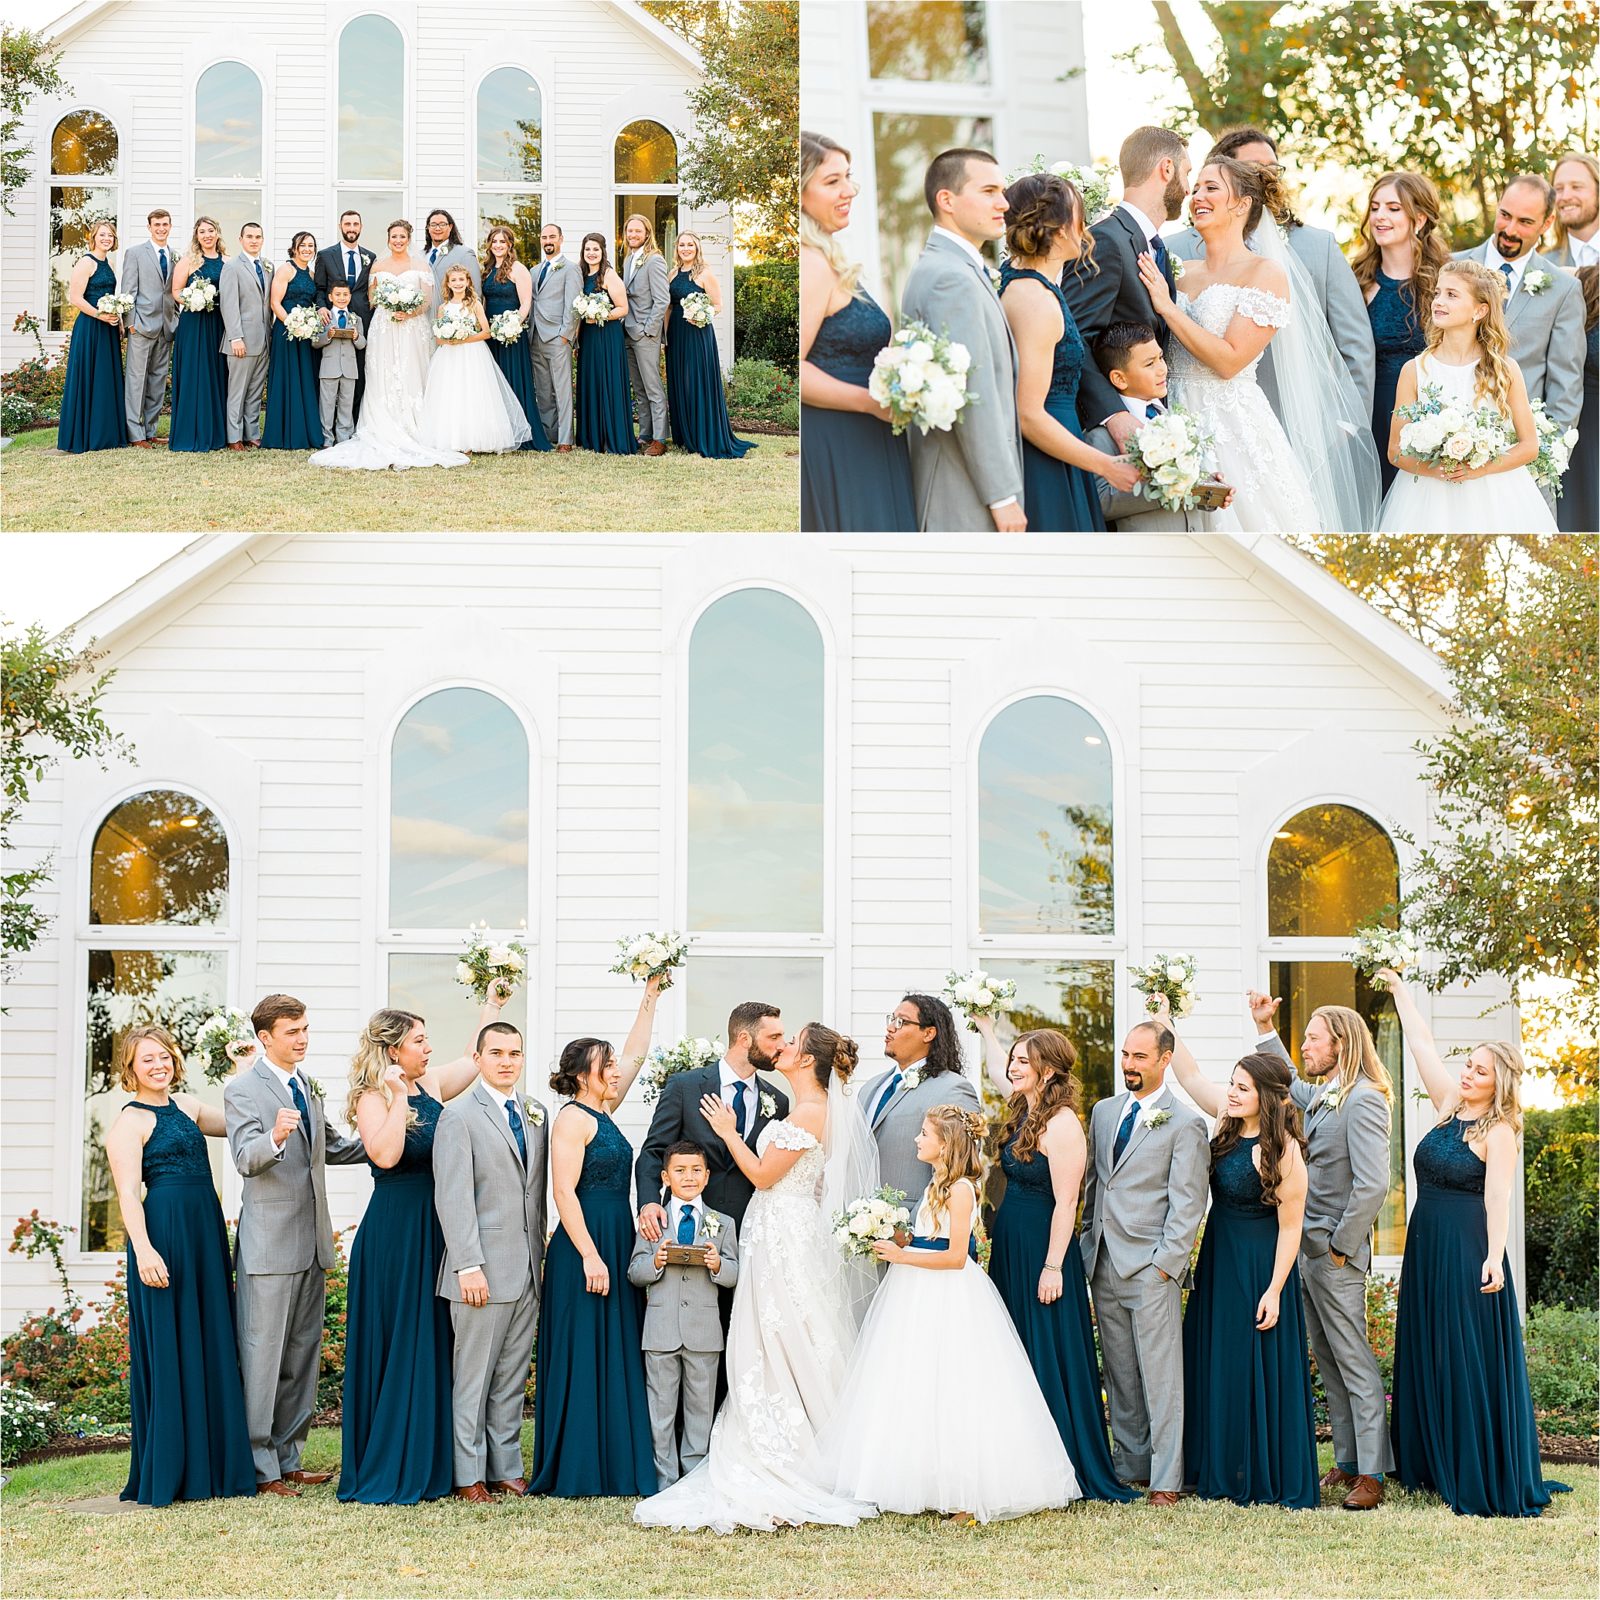 A newlywed couple shares a kiss surrounded by their cheering bridal party in front of a White wedding chapel by Dallas Wedding Photographer Jillian Hogan 